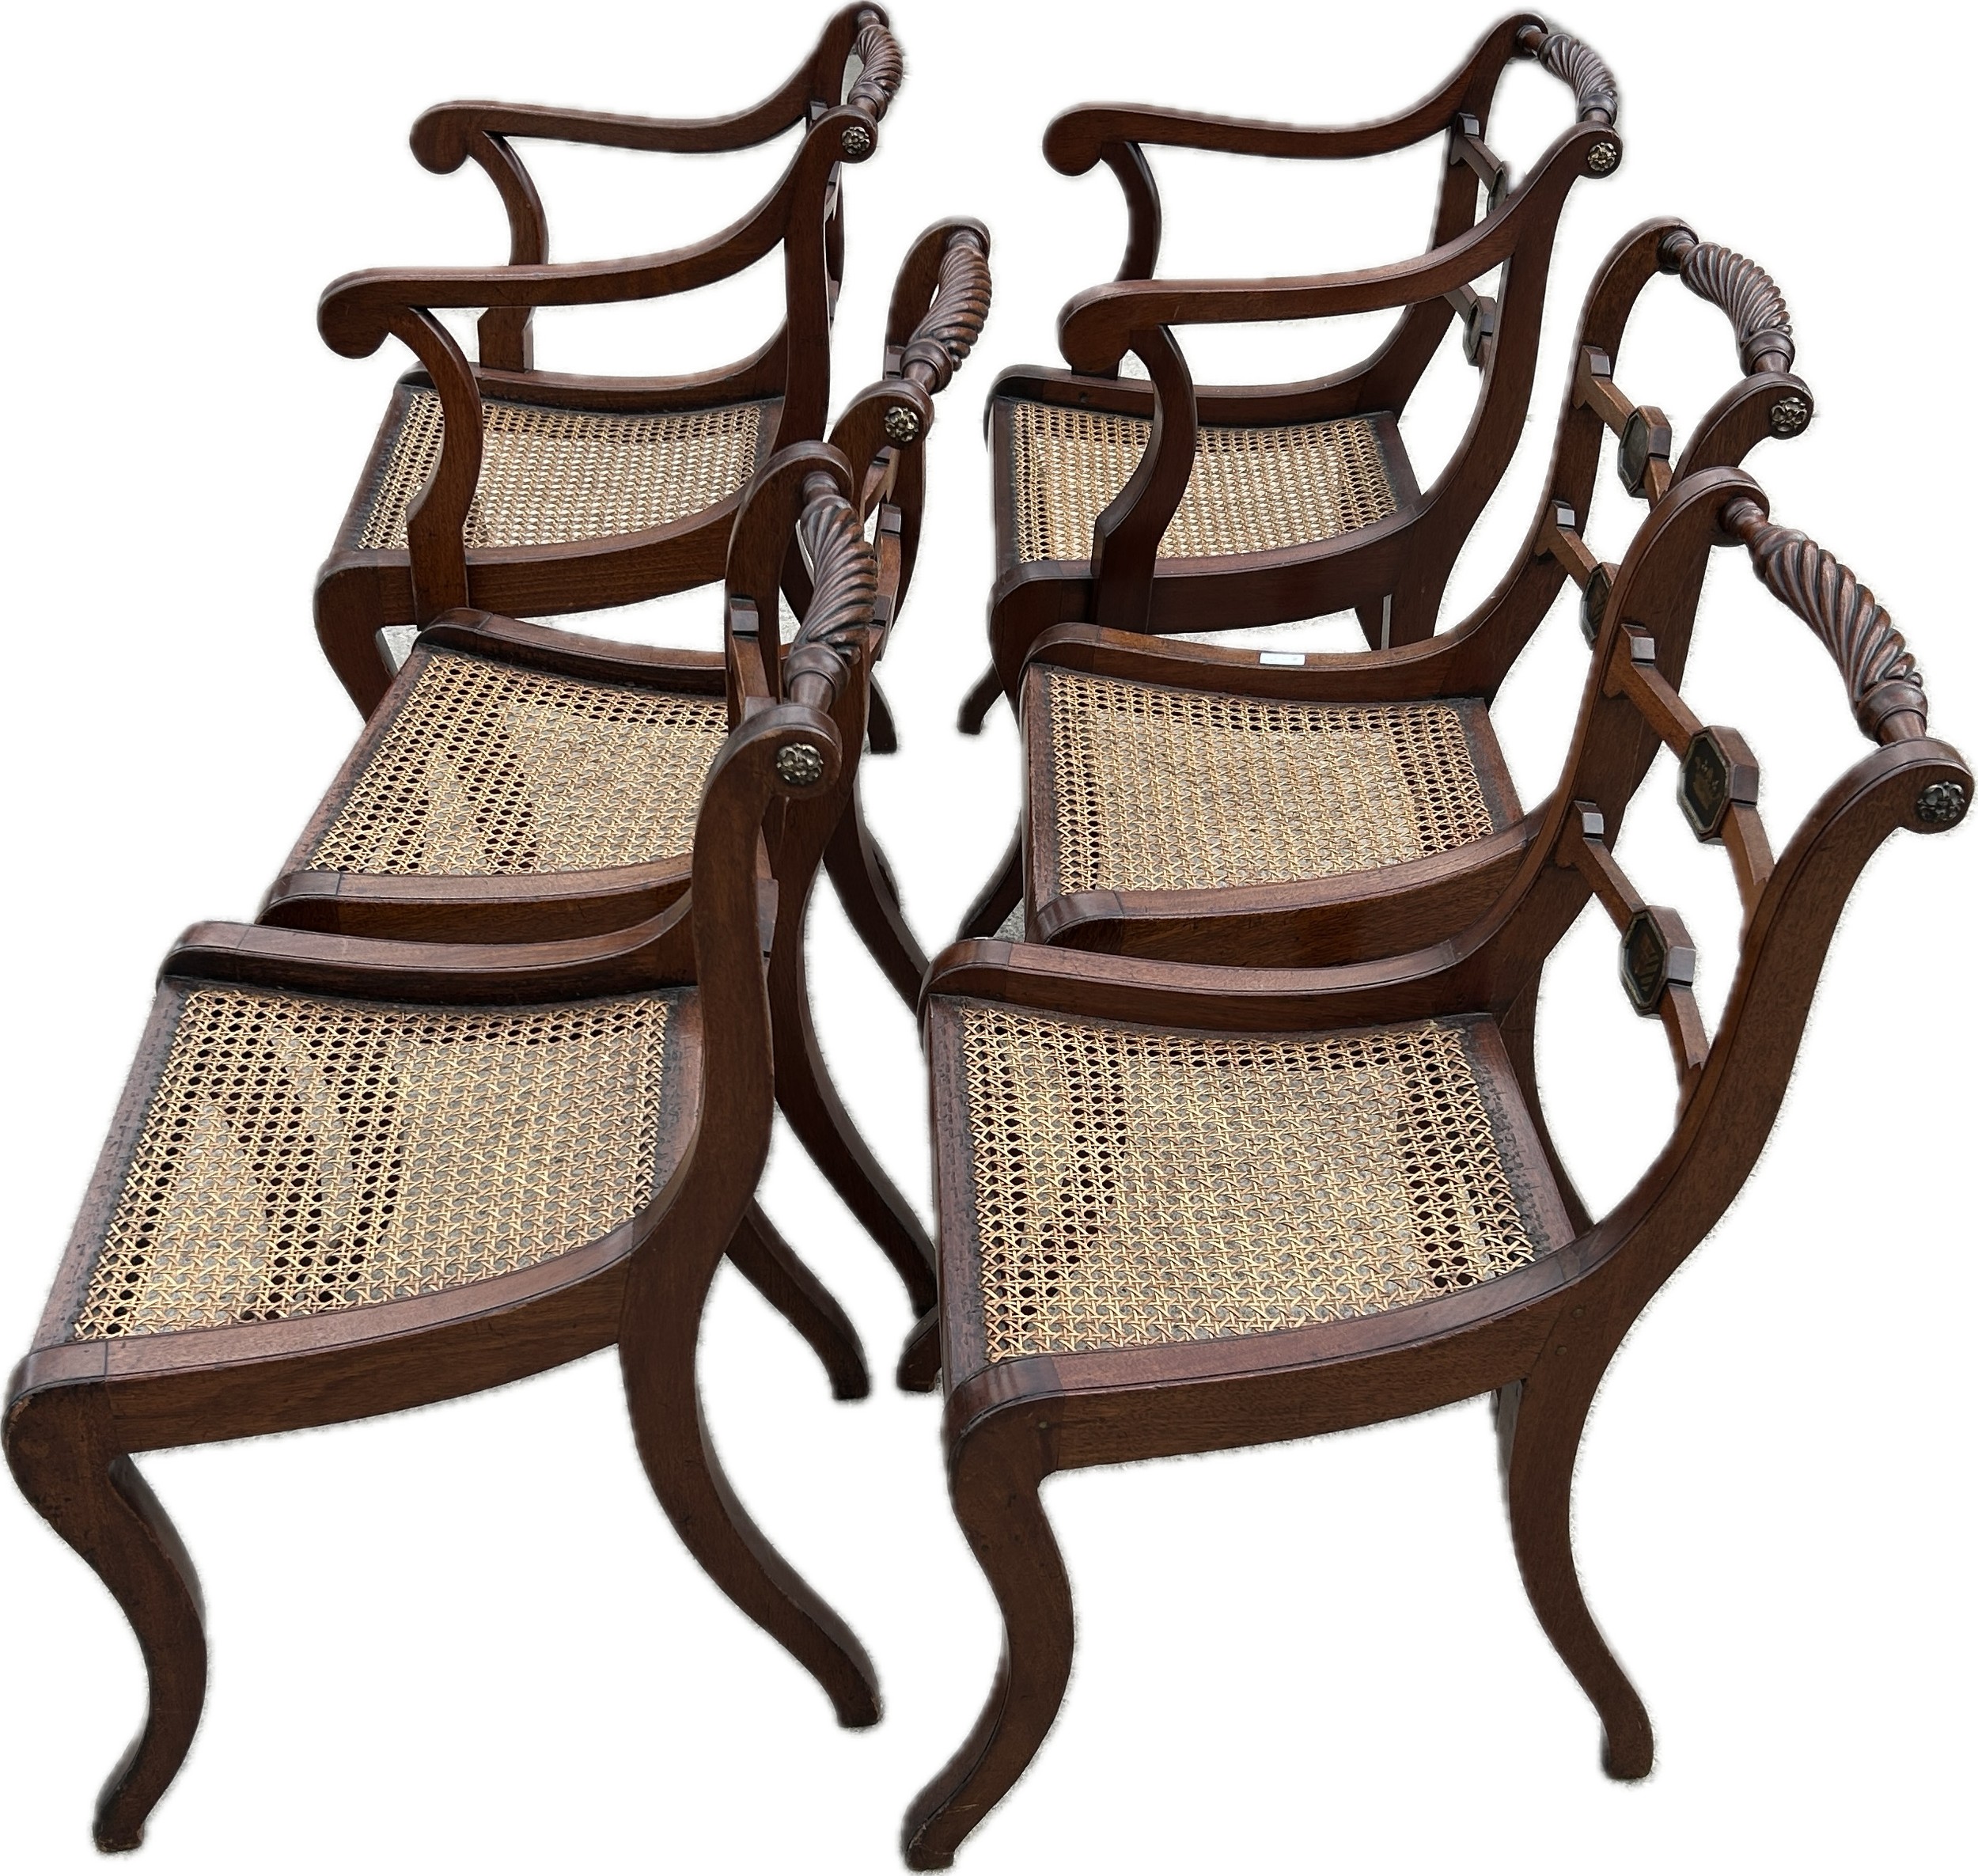 Six antique mahogany dining chairs to include 2 carvers, armorial crest to backs - Image 2 of 4